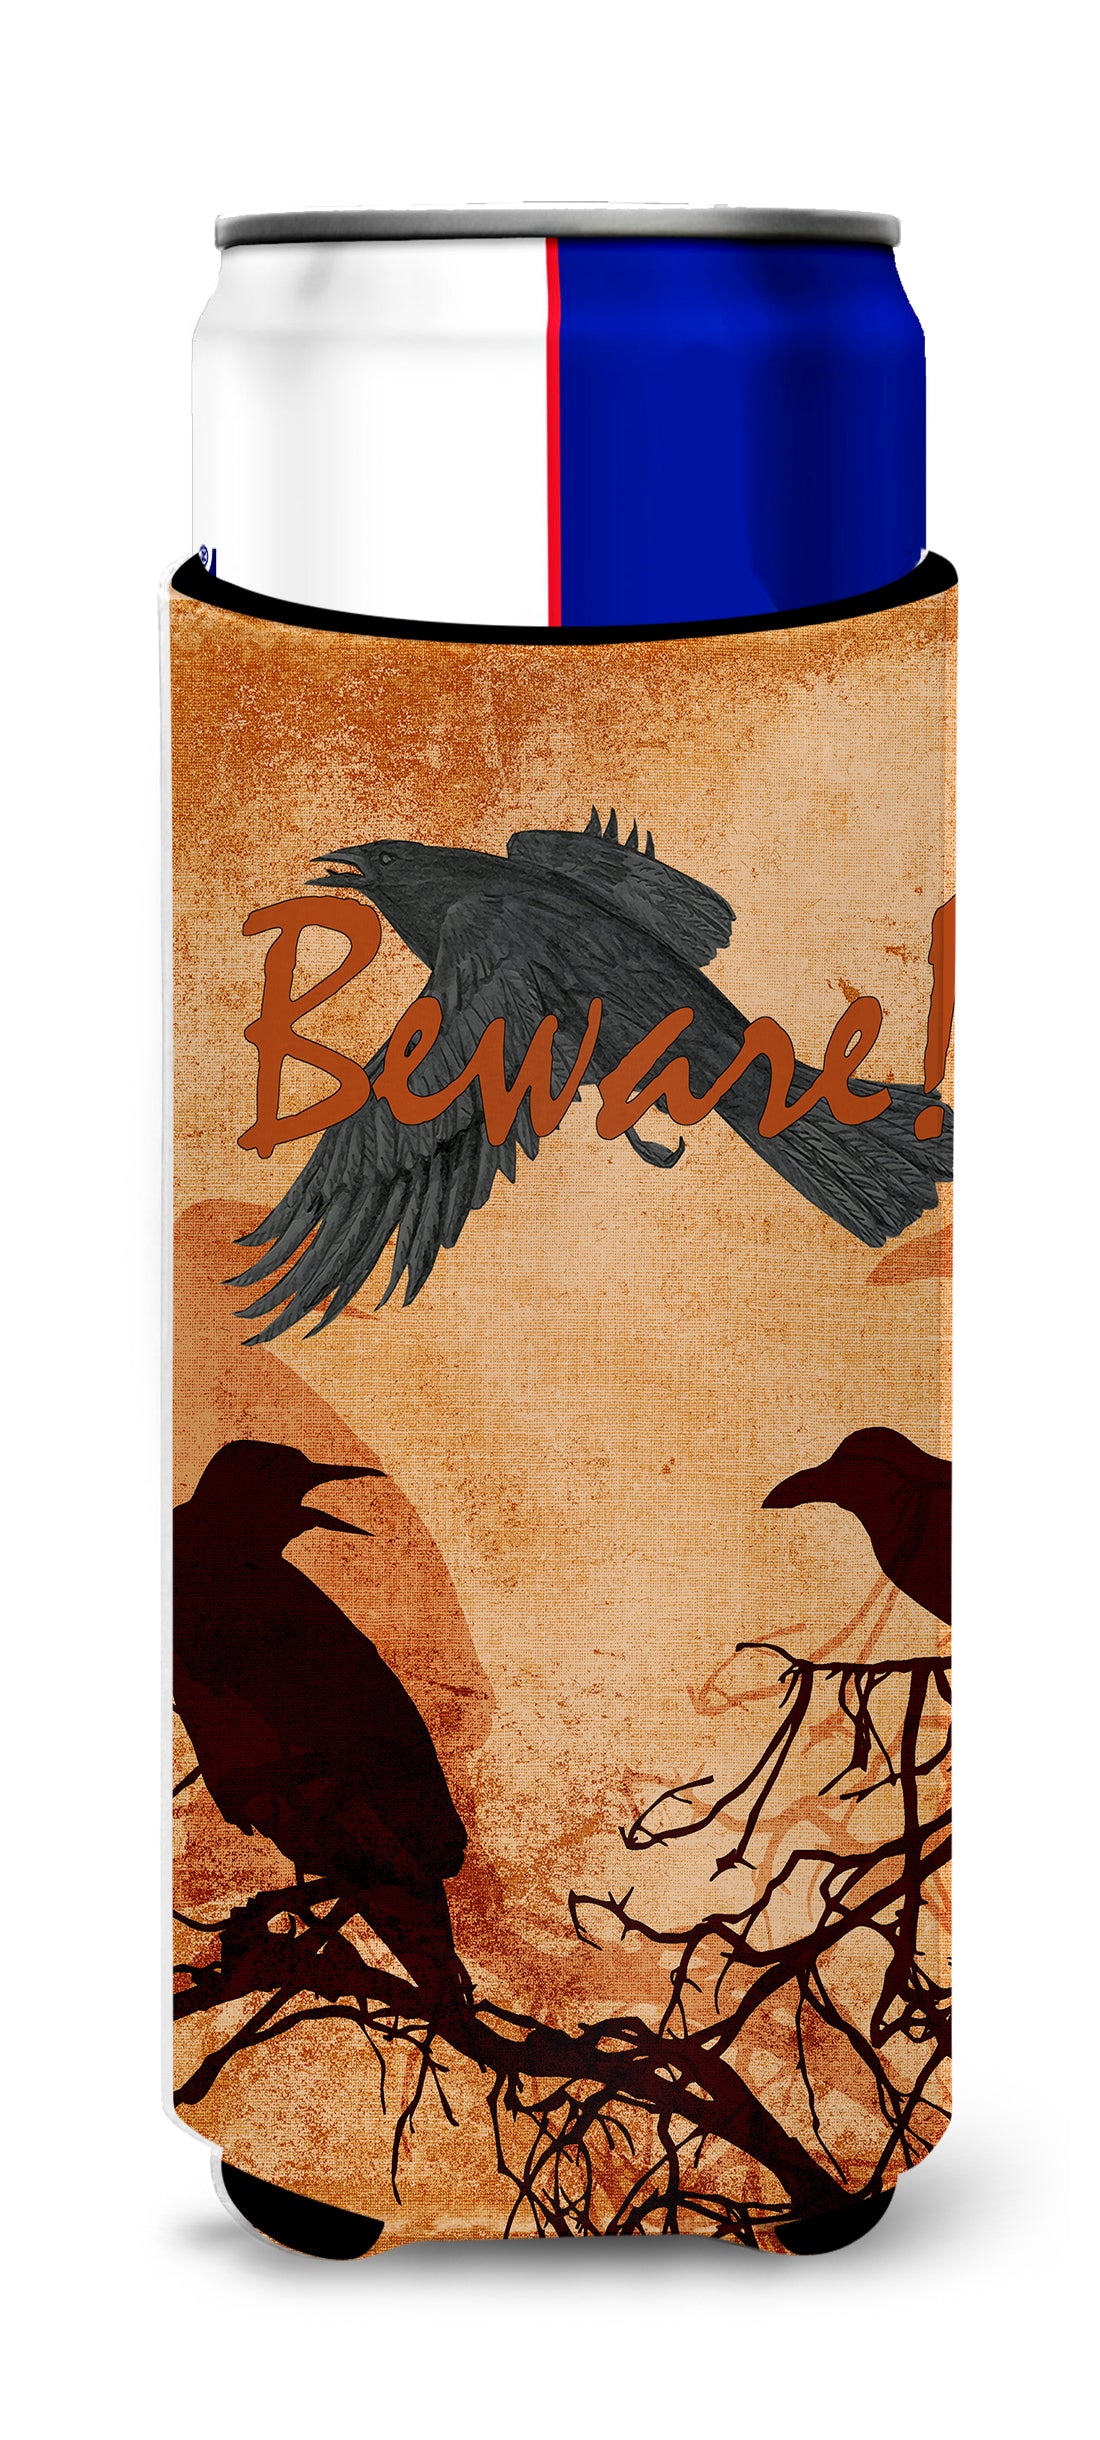 Beware of the Black Crows Halloween Ultra Beverage Insulators for slim cans SB3009MUK.